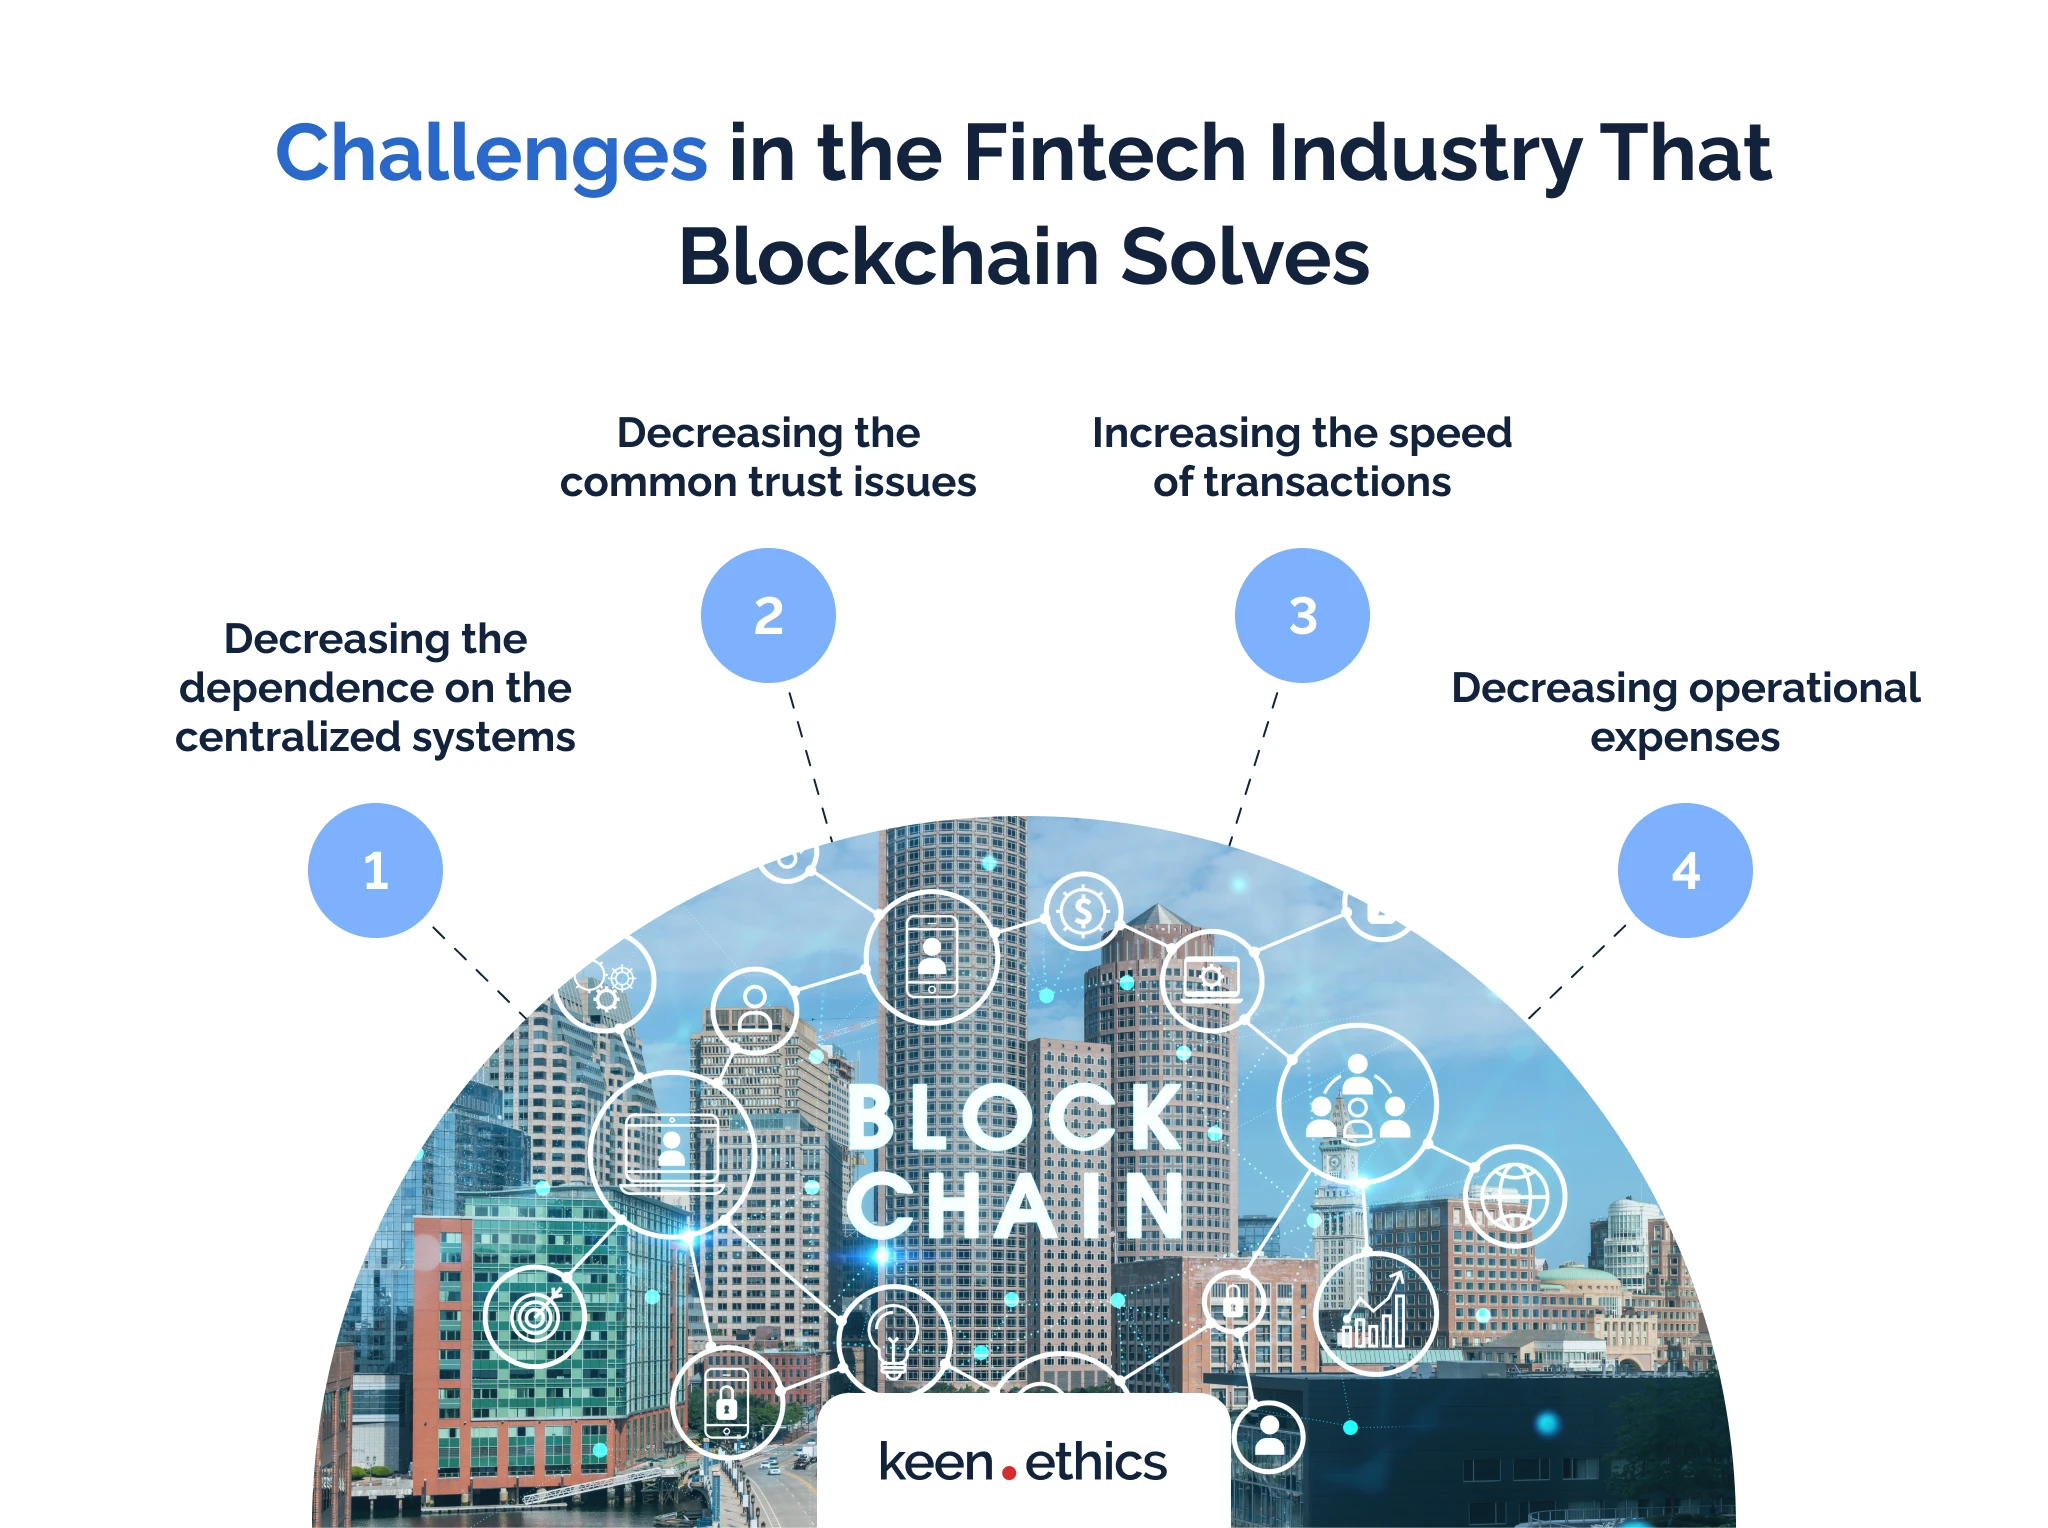 Challenges in the fintech industry that blockchain solves